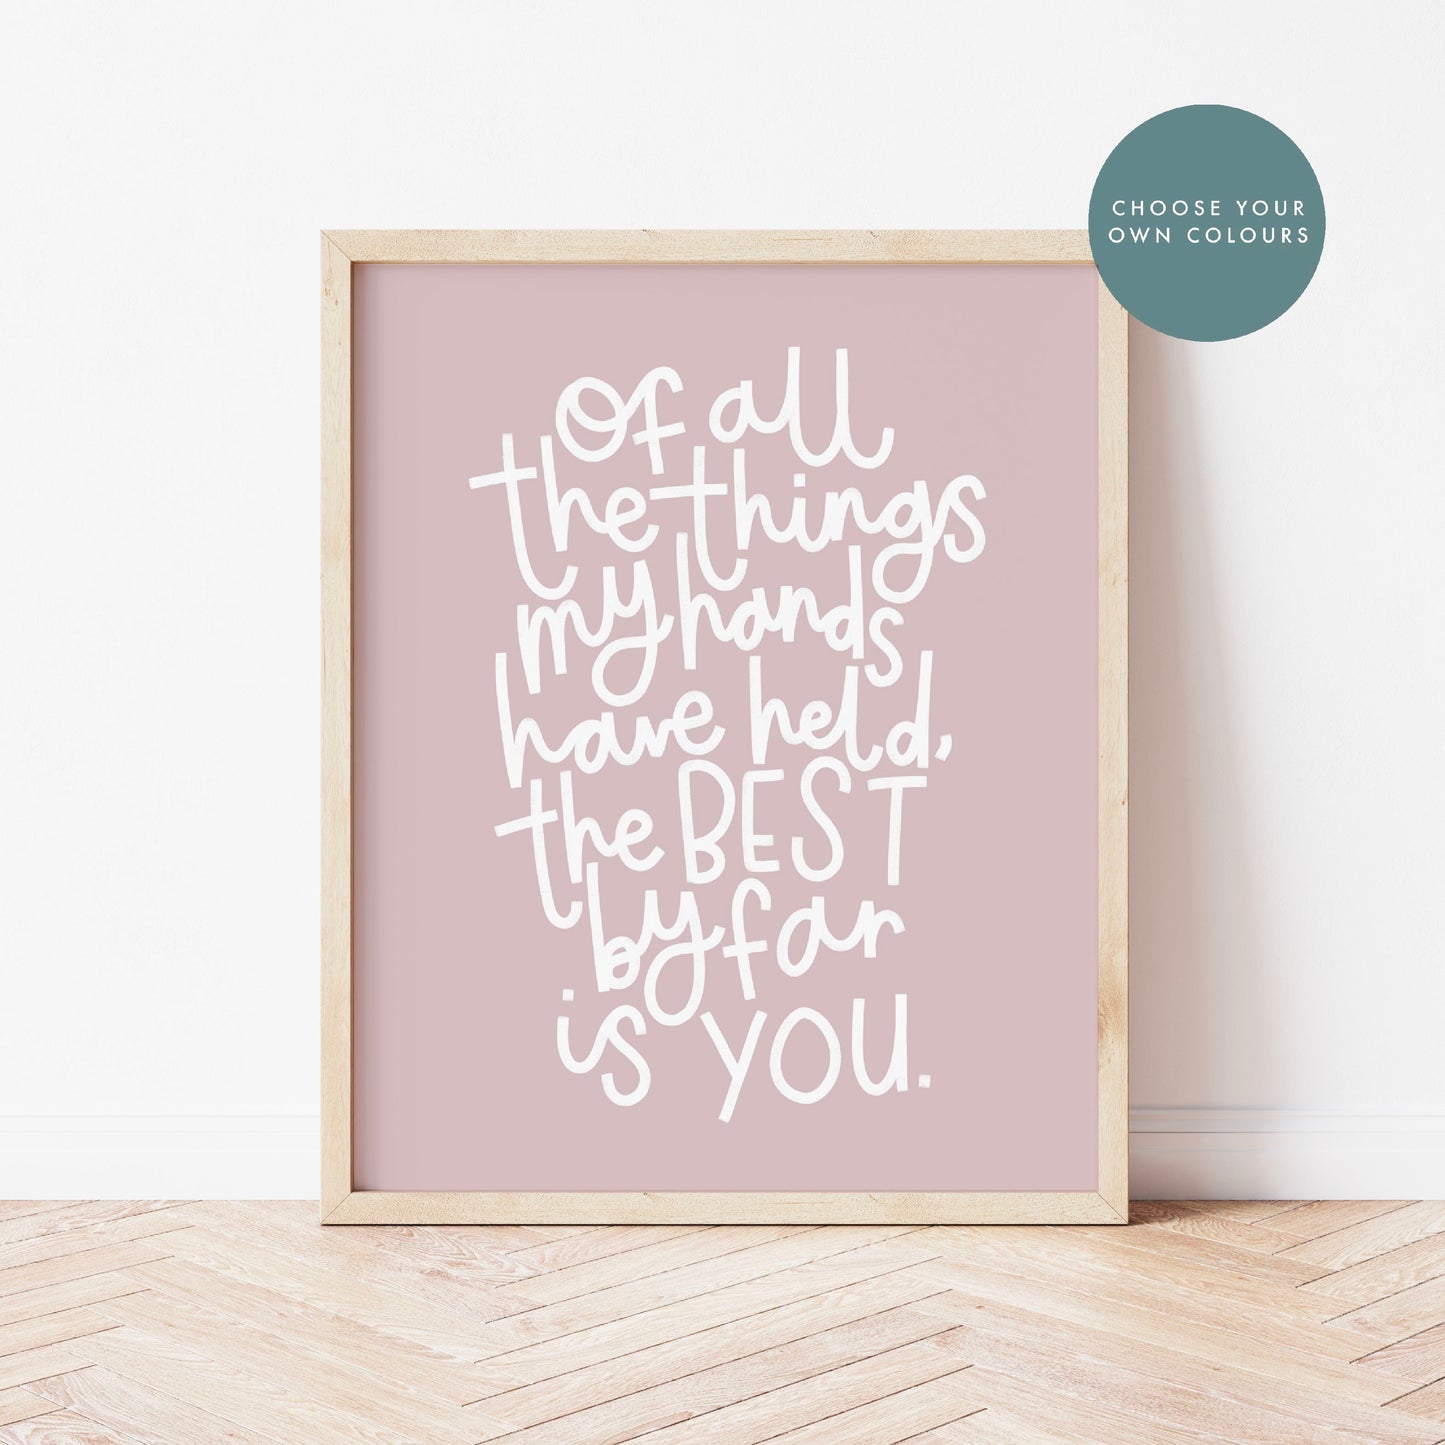 All The Things Print Limited Edition Choose Your Own Colours